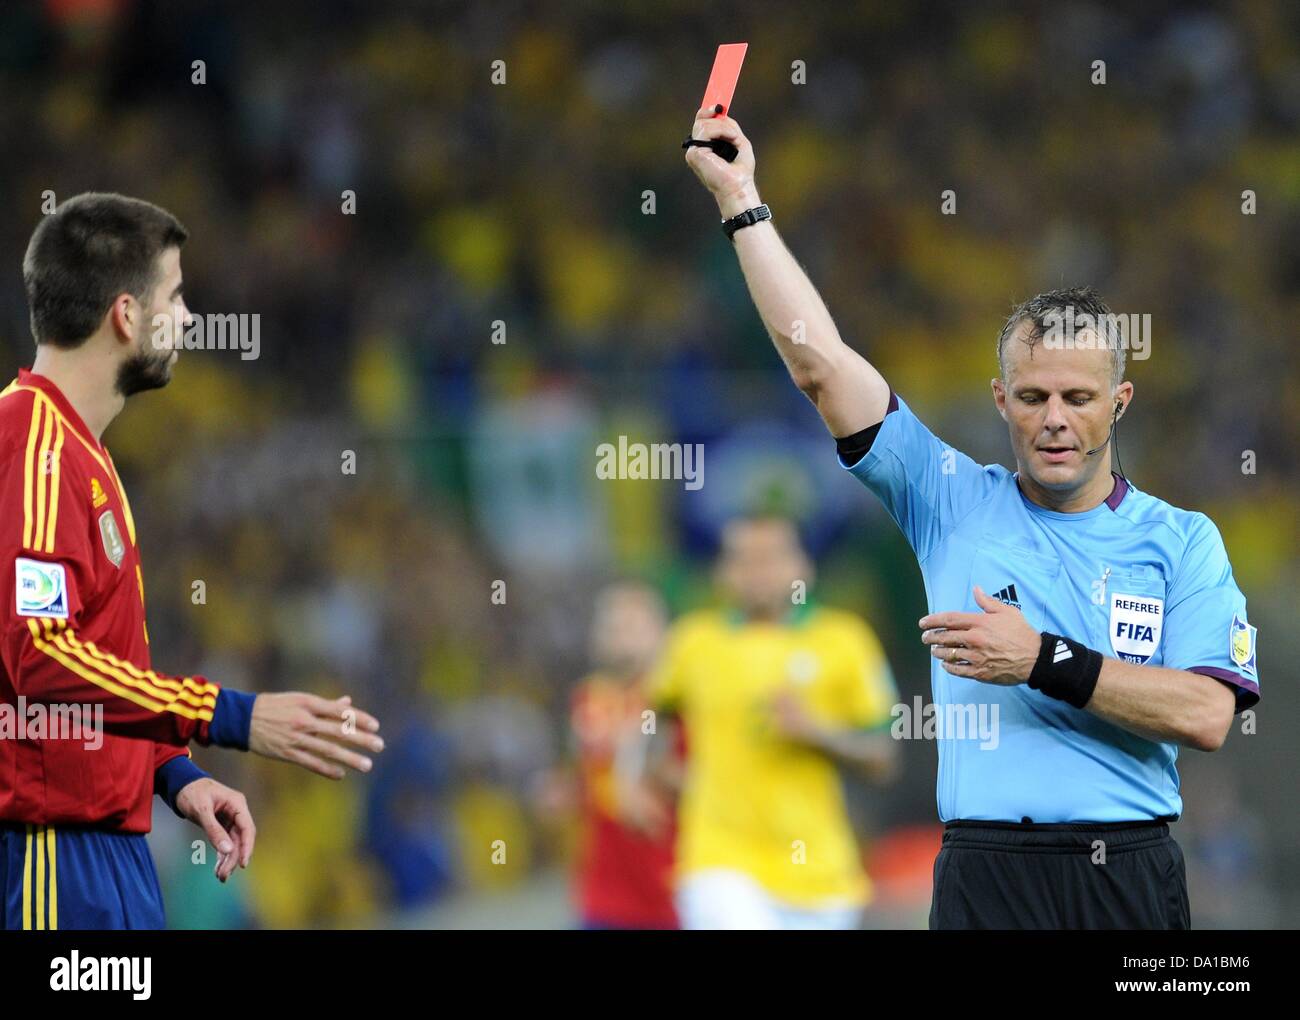 Rio de Janeiro, Brazil. 30 June 2013, Confederations Cup final, Brazil v Spain 3-0: Spain's Gerard Pique (L) receives the red card from referee Bjoern Kuipers. Credit:  dpa picture alliance/Alamy Live News Stock Photo